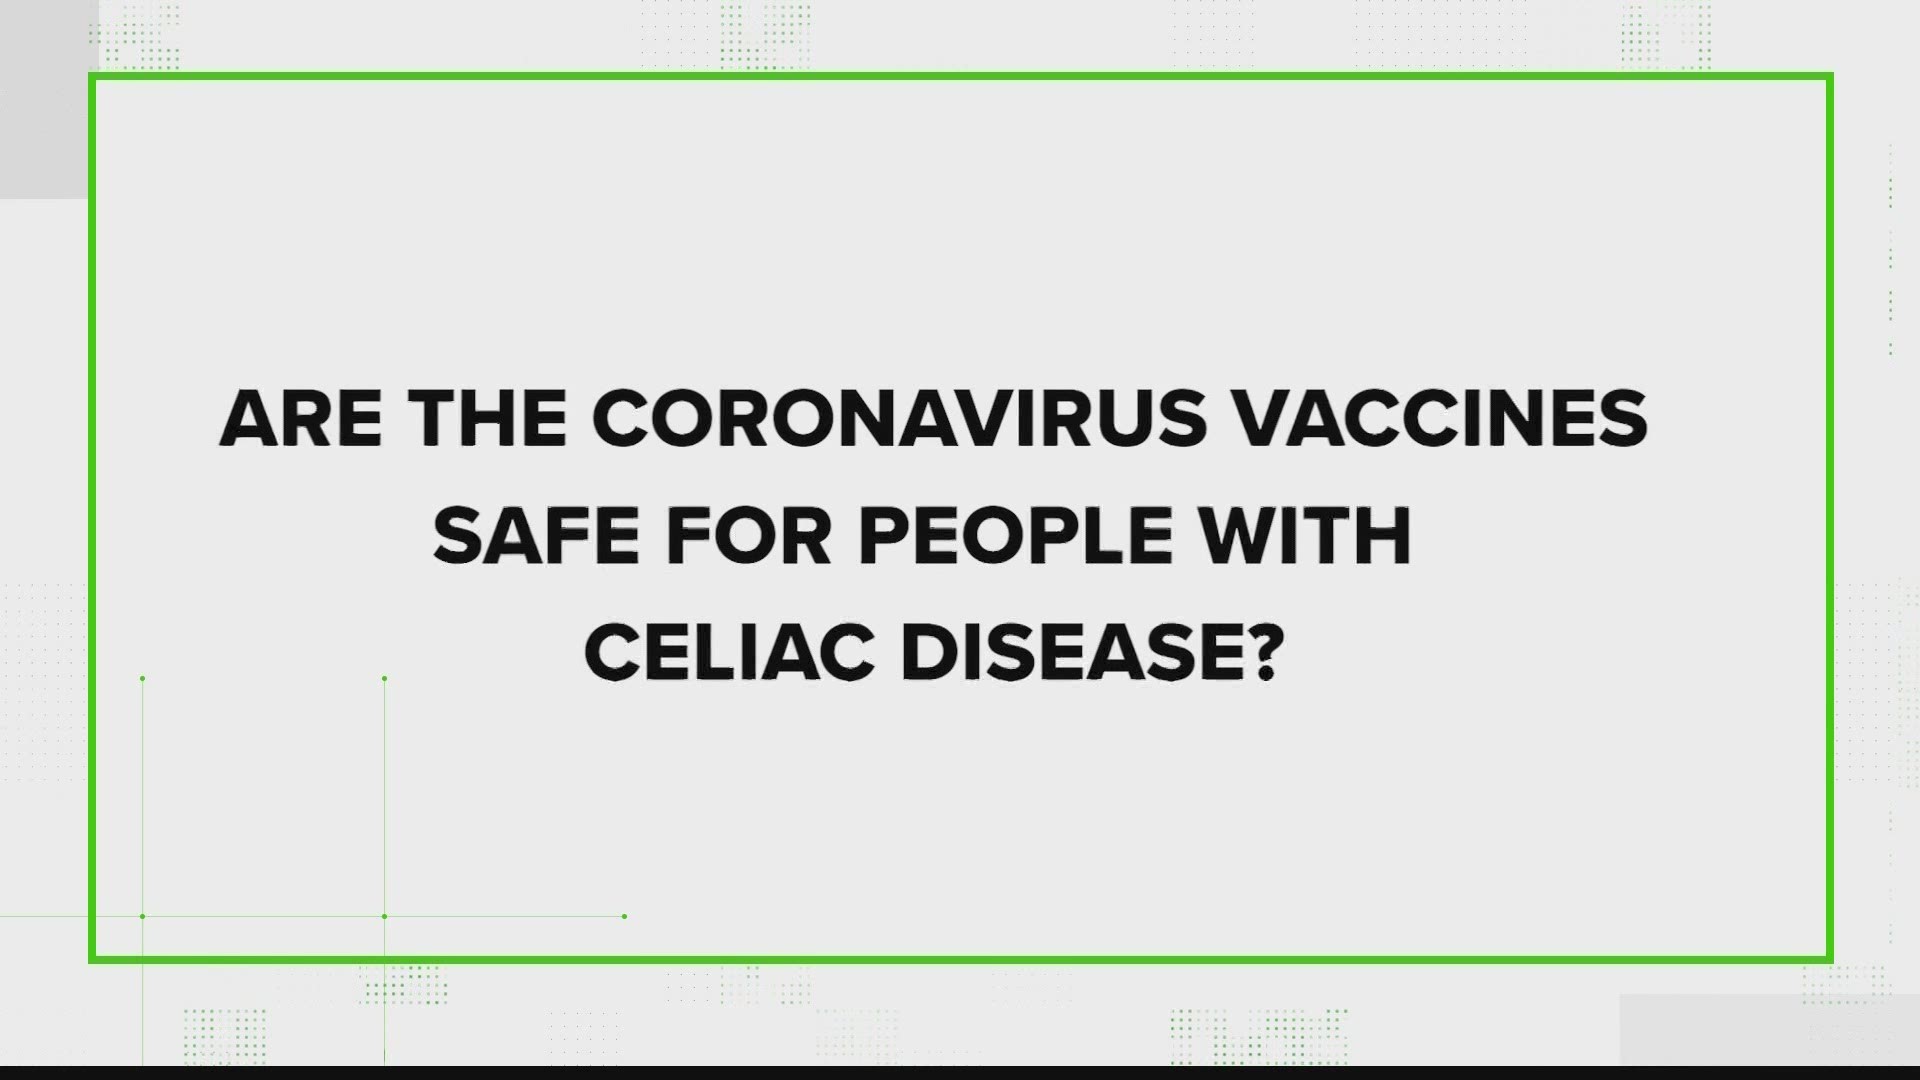 There have been a lot of questions about whether or not the COVID vaccines contain gluten and whether they would be safe for those with Celiac disease.